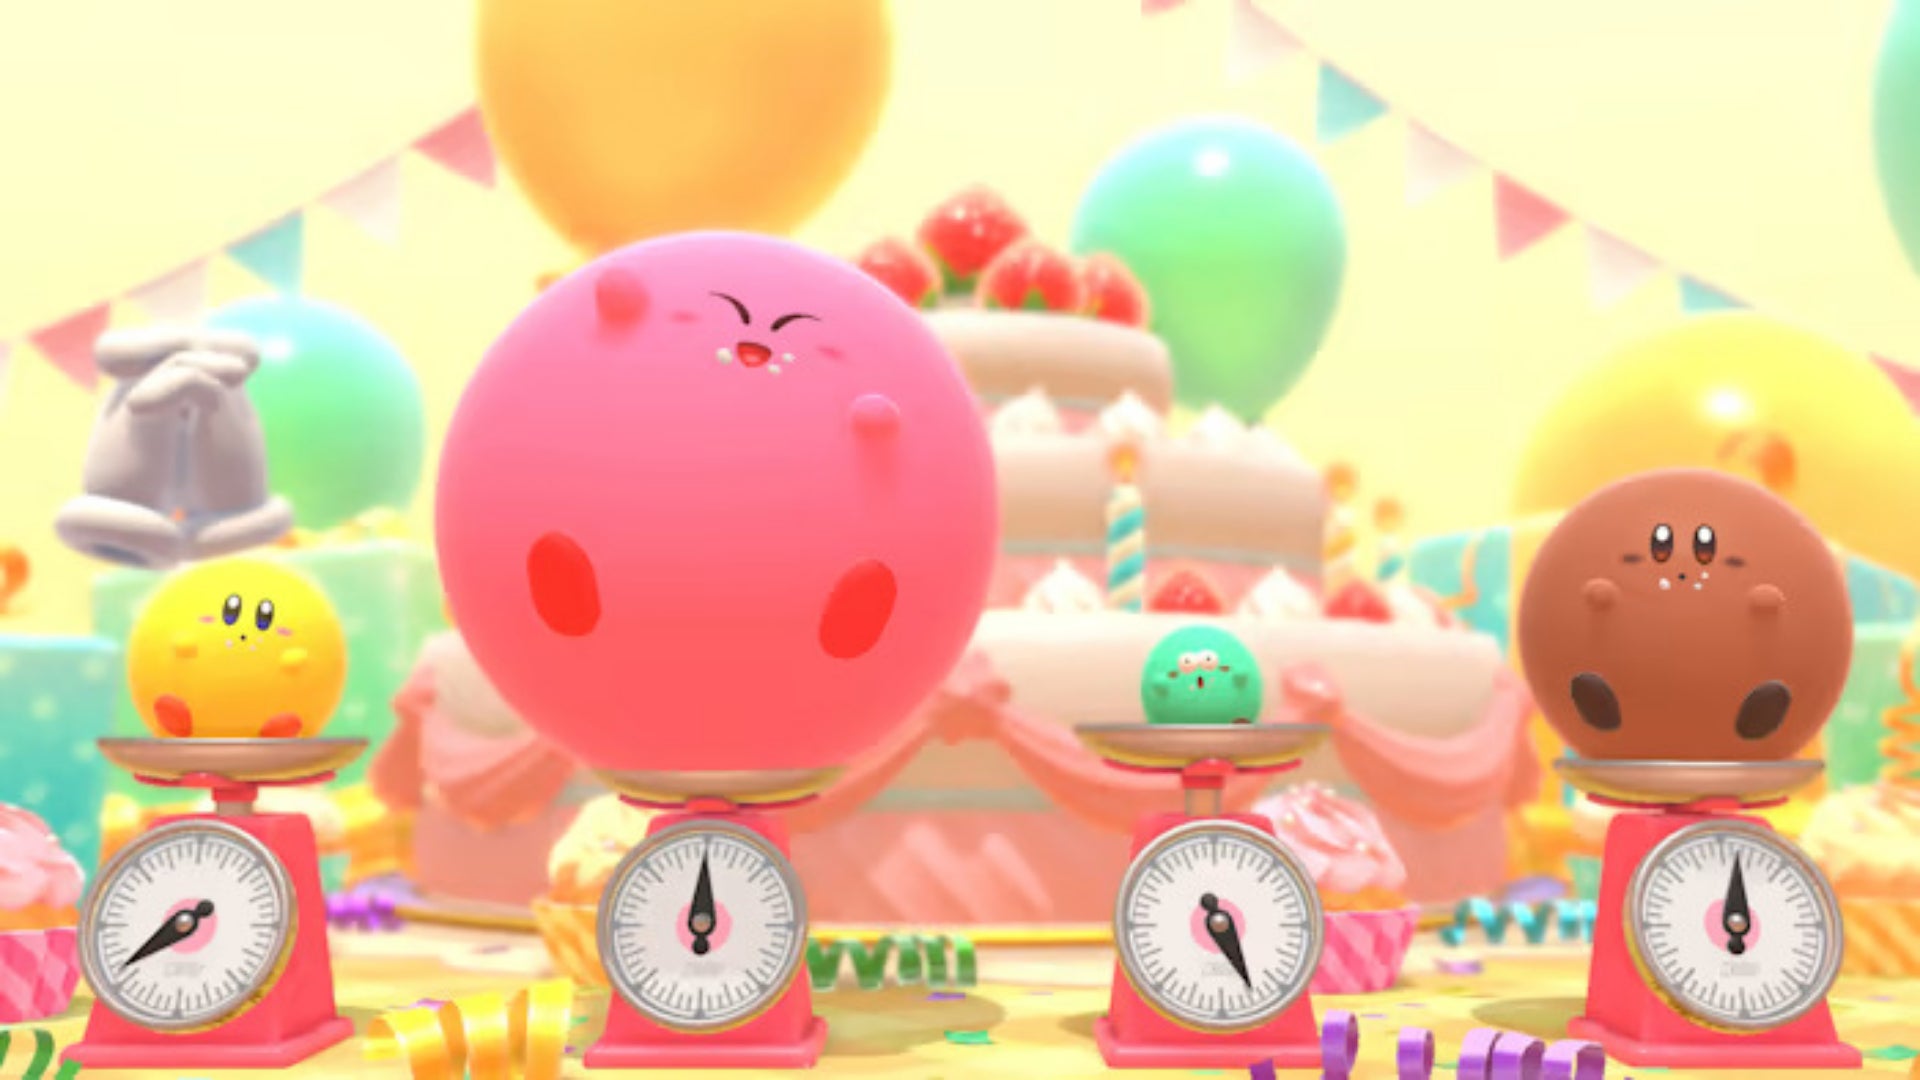 Kirby and colourful poyos sit beside each other on scales in Kirby's Dream Buffet.